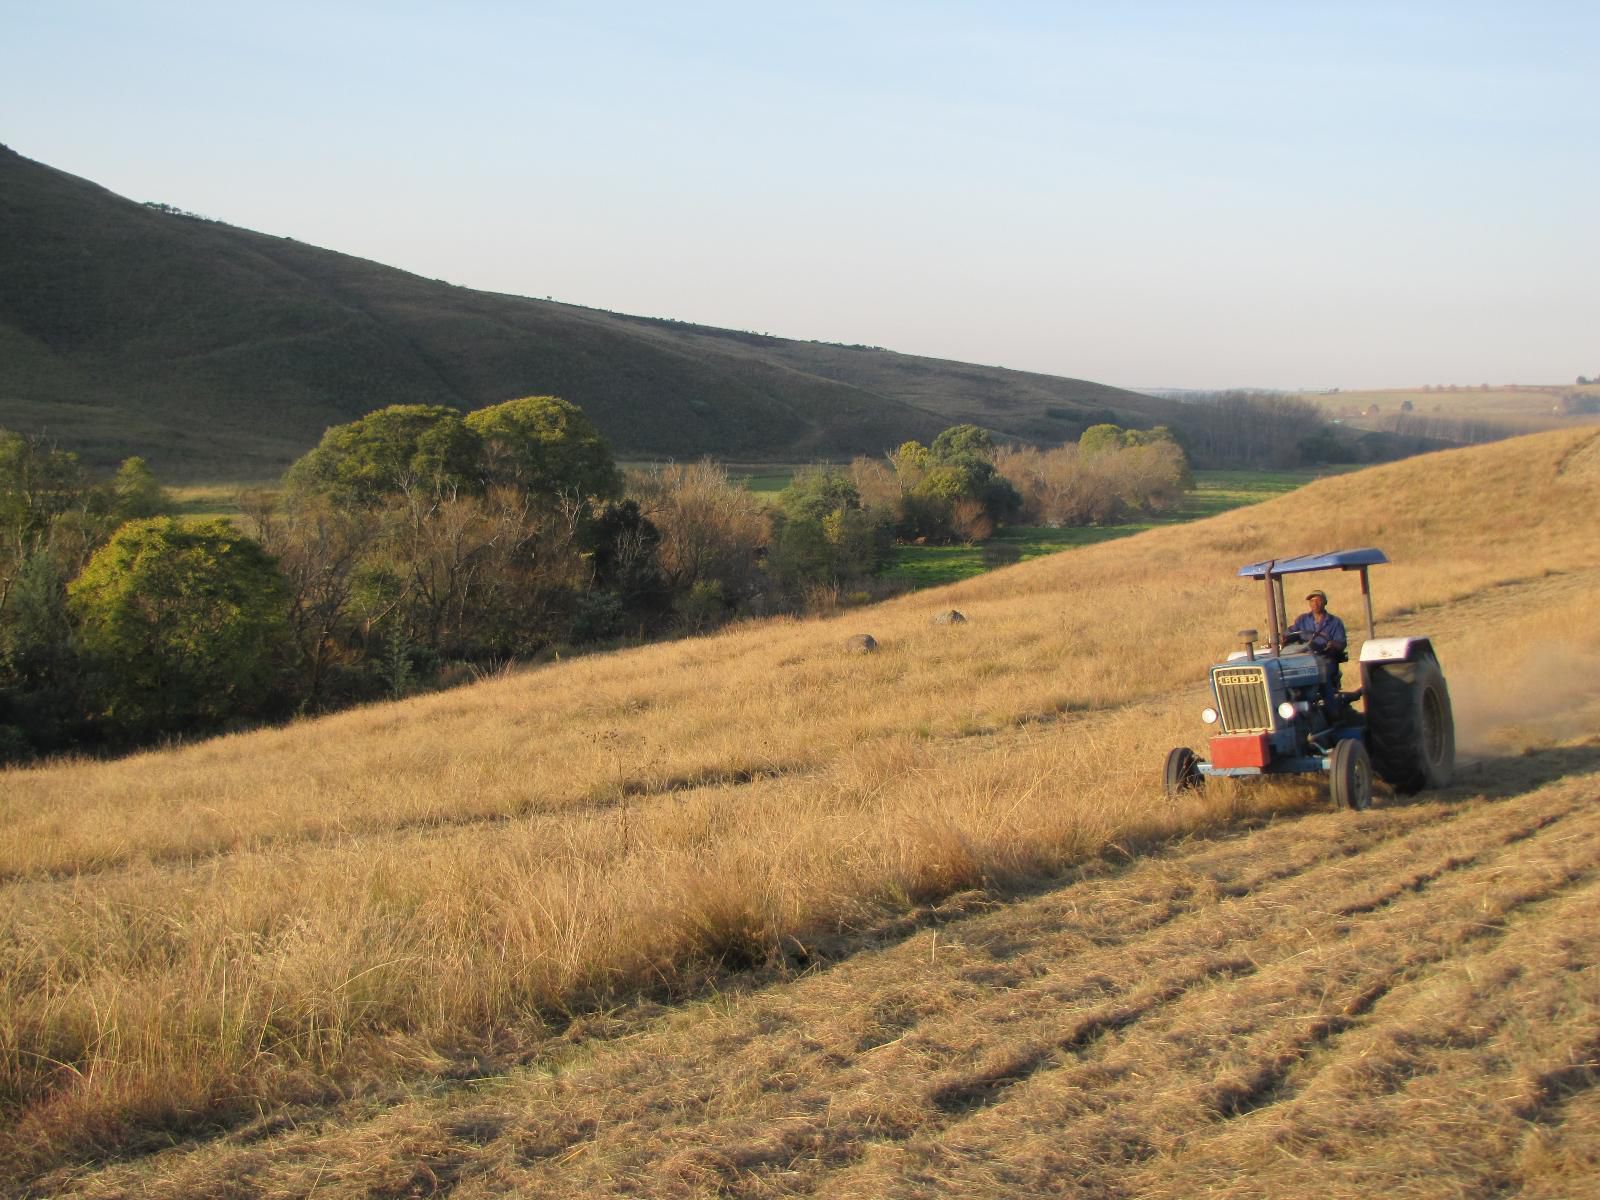 Inversanda Cottages Dargle Howick Kwazulu Natal South Africa Field, Nature, Agriculture, Tractor, Vehicle, Lowland